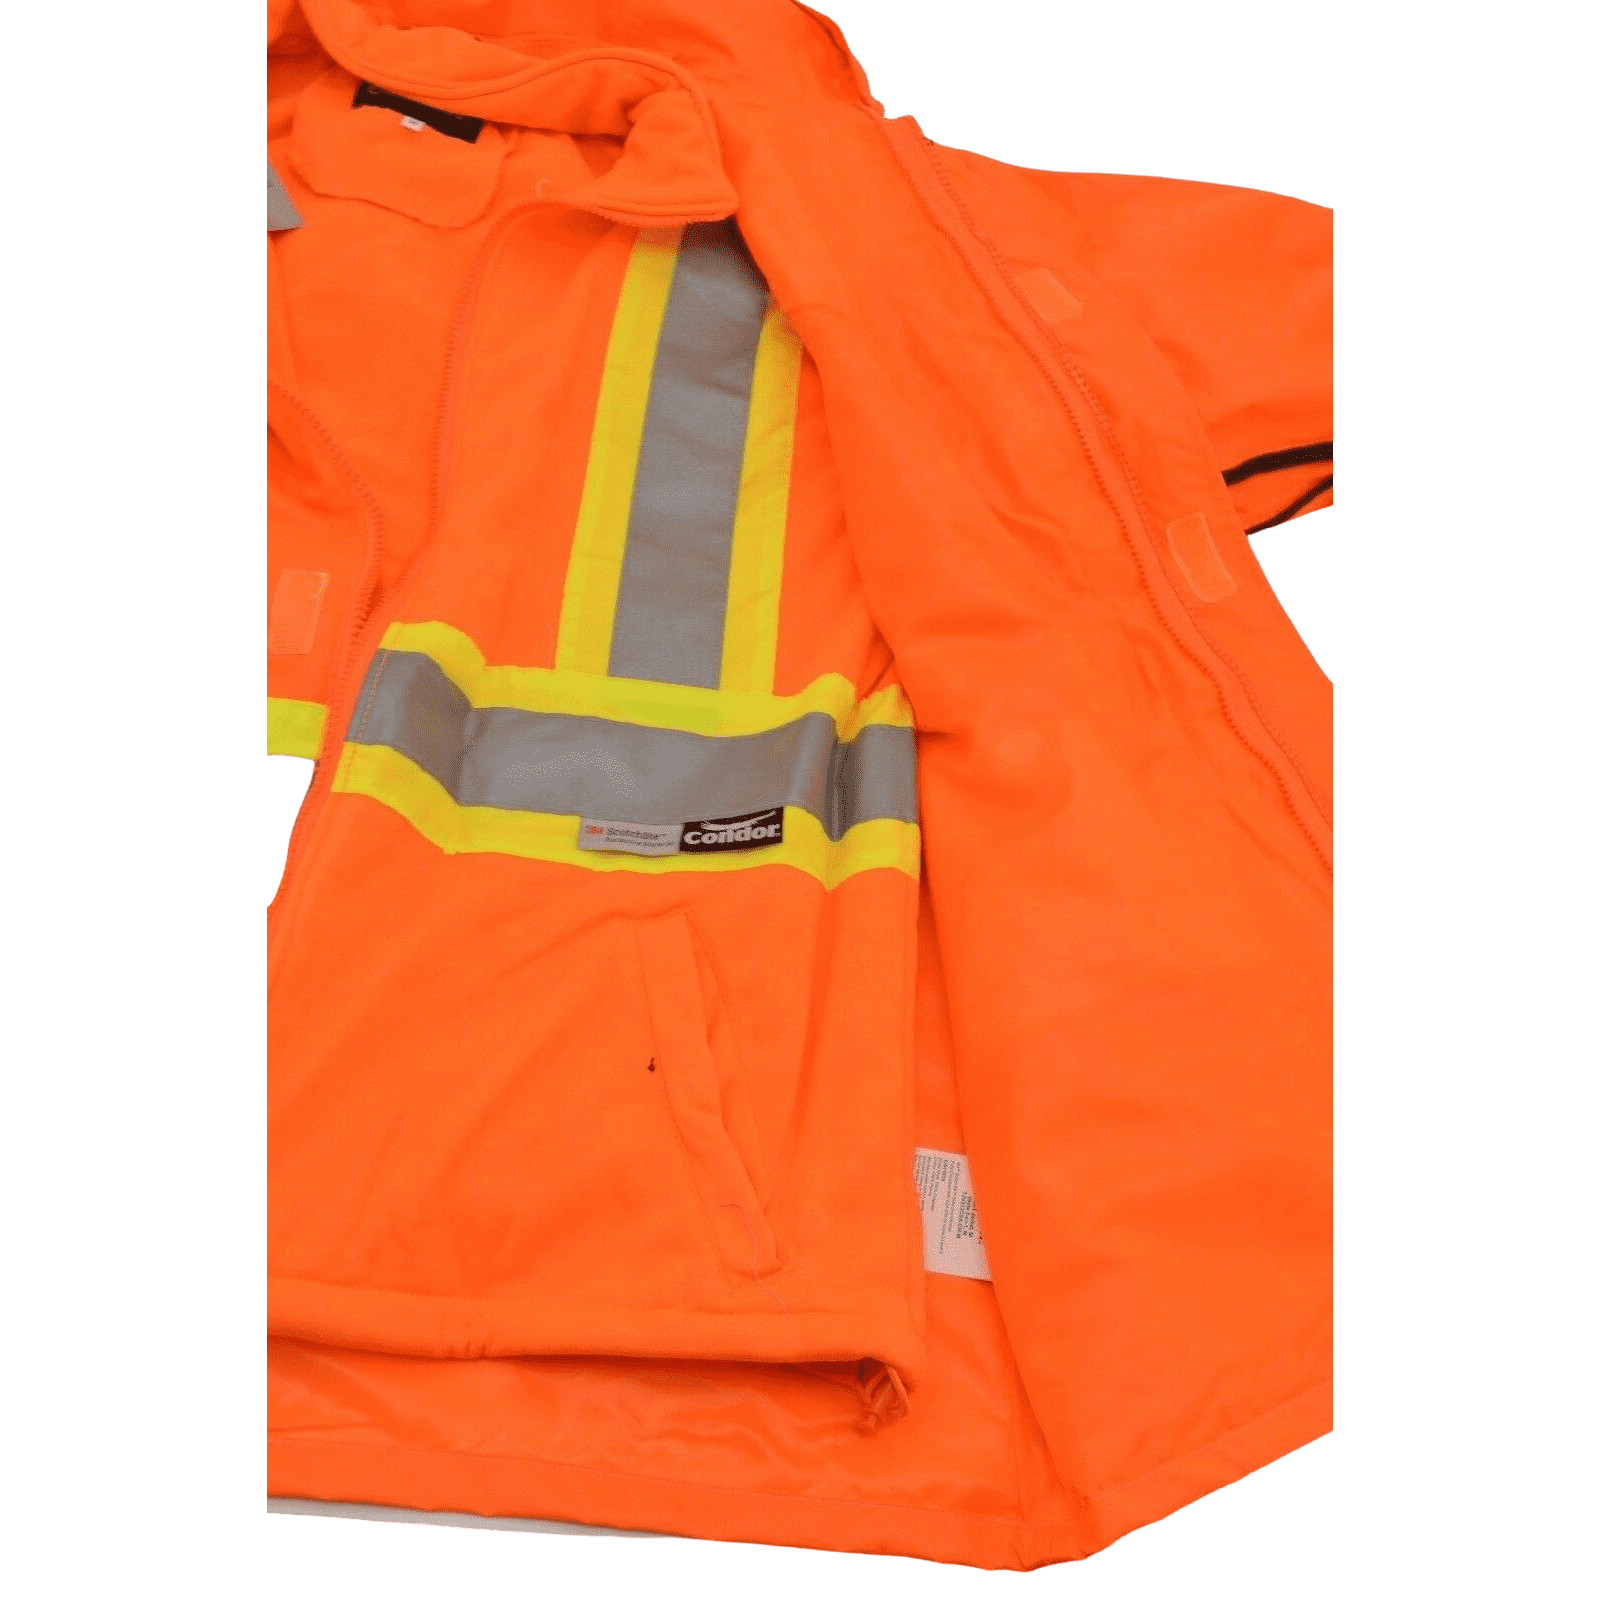 Condor men's 3-in-1 flagmans Safety jacket with removable fleece lining in size Large in high viz orange